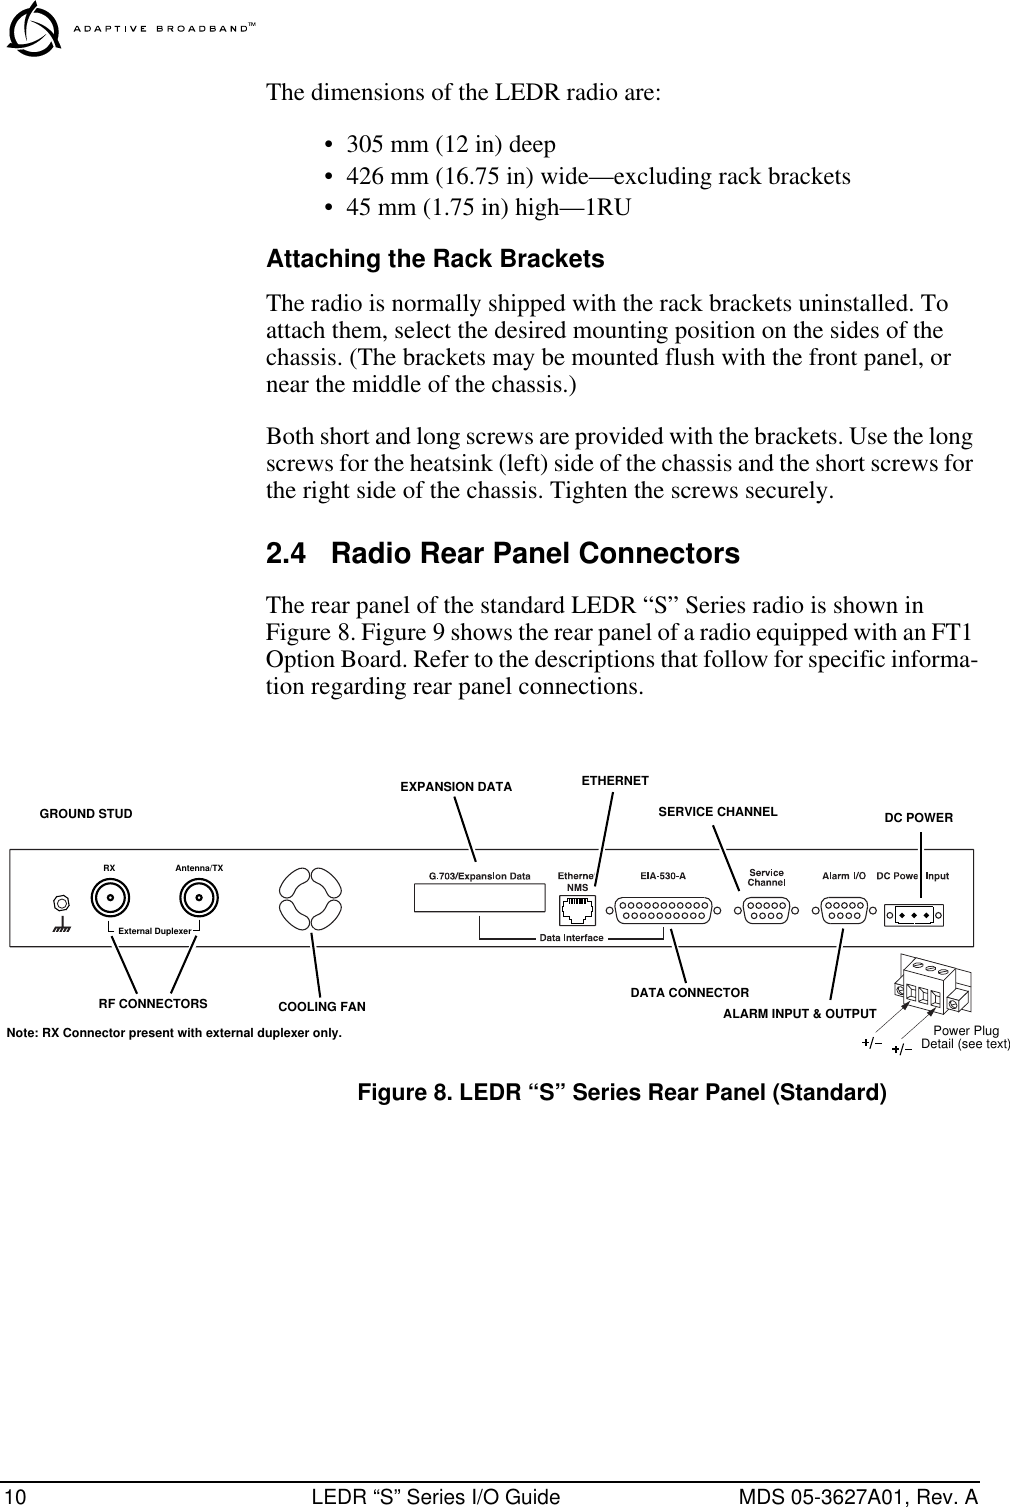  10 LEDR “S” Series I/O Guide MDS 05-3627A01, Rev. A The dimensions of the LEDR radio are:• 305 mm (12 in) deep • 426 mm (16.75 in) wide—excluding rack brackets• 45 mm (1.75 in) high—1RU Attaching the Rack Brackets The radio is normally shipped with the rack brackets uninstalled. To attach them, select the desired mounting position on the sides of the chassis. (The brackets may be mounted flush with the front panel, or near the middle of the chassis.)Both short and long screws are provided with the brackets. Use the long screws for the heatsink (left) side of the chassis and the short screws for the right side of the chassis. Tighten the screws securely. 2.4 Radio Rear Panel Connectors The rear panel of the standard LEDR “S” Series radio is shown in Figure 8. Figure 9 shows the rear panel of a radio equipped with an FT1 Option Board. Refer to the descriptions that follow for specific informa-tion regarding rear panel connections. Invisible place holder Figure 8. LEDR “S” Series Rear Panel (Standard)Antenna/TXExternal DuplexerRXPower PlugDetail (see text)GROUND STUDCOOLING FANEXPANSION DATADATA CONNECTORETHERNETSERVICE CHANNELALARM INPUT &amp; OUTPUTDC POWER RF CONNECTORSNote: RX Connector present with external duplexer only.